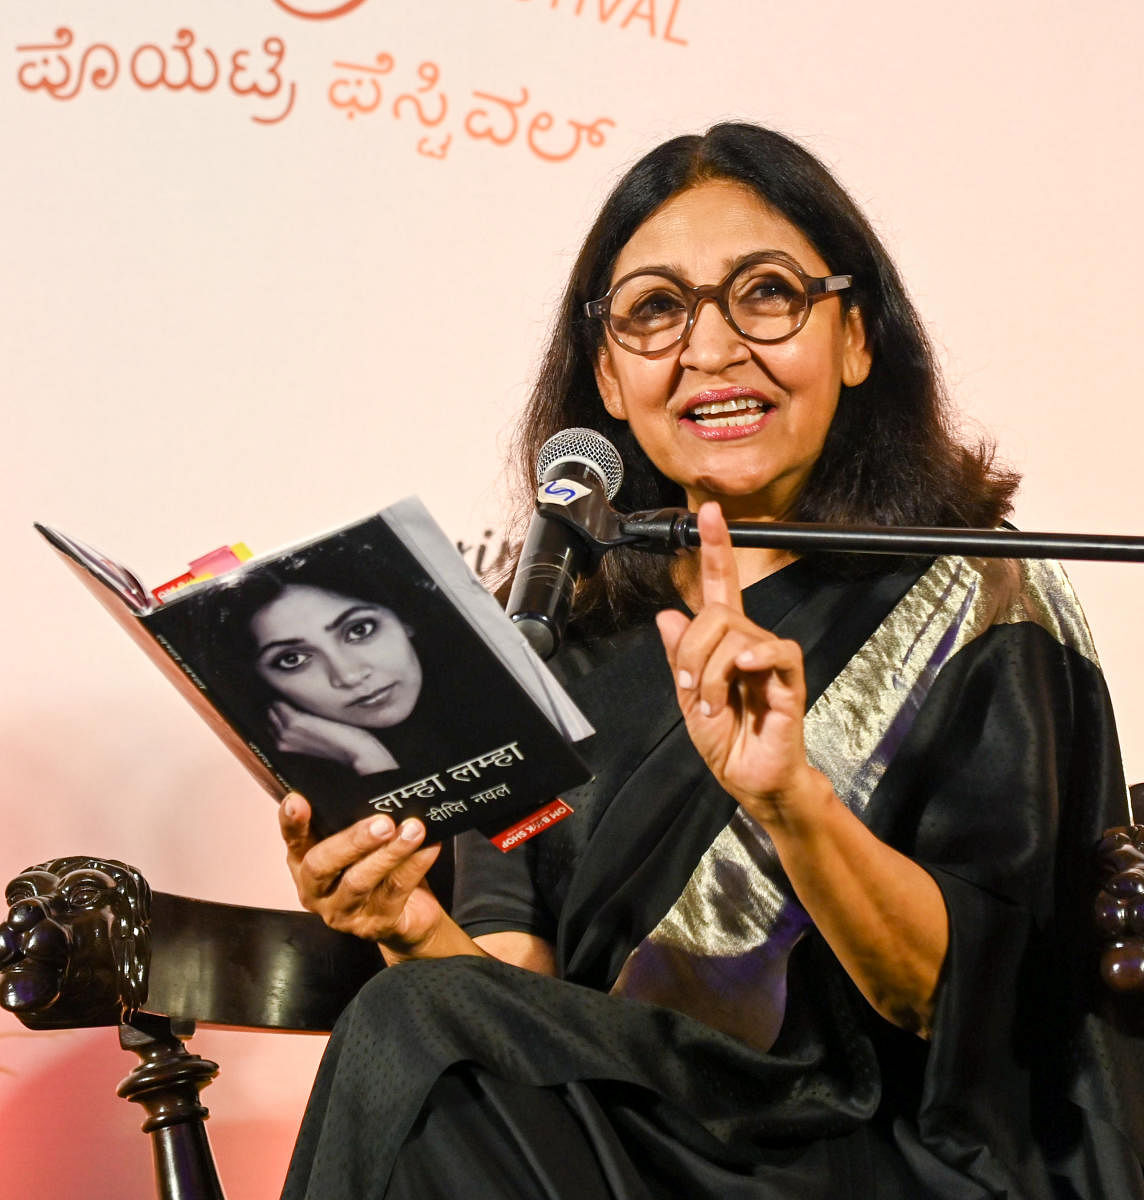 Actress Deepti Naval at the festival on Saturday. Credit: DH Photo/ M S Manjunath